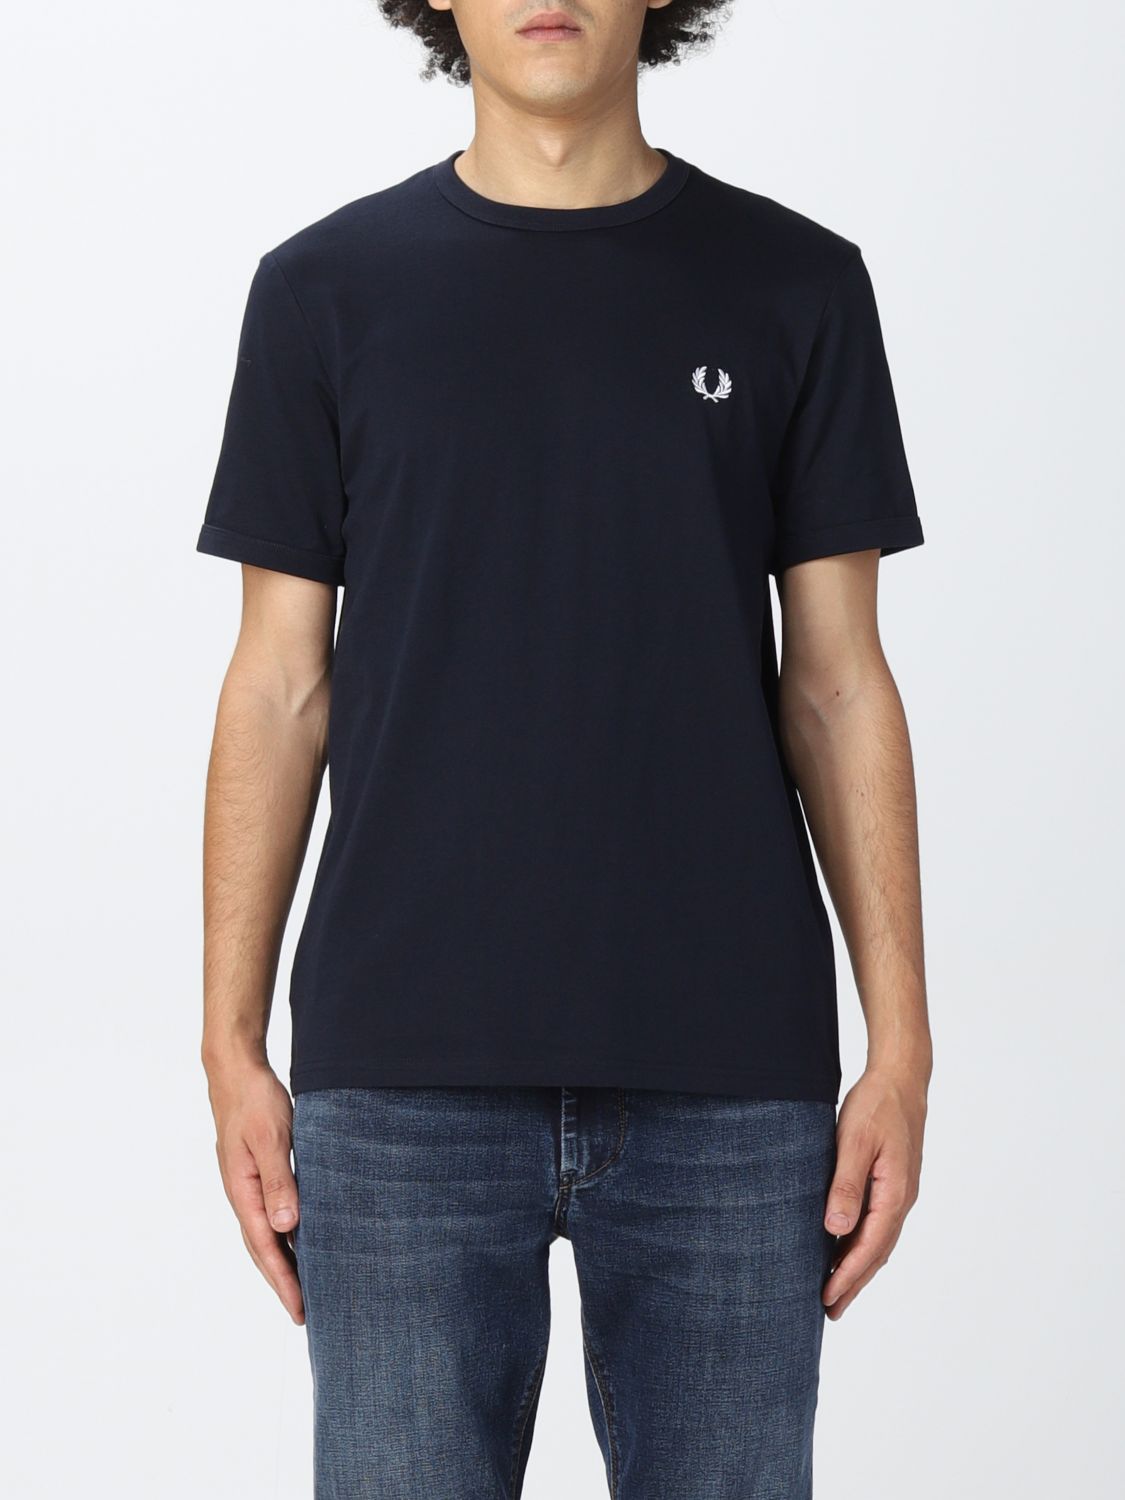 T-shirt Fred Perry: Fred Perry t-shirt for man navy 1